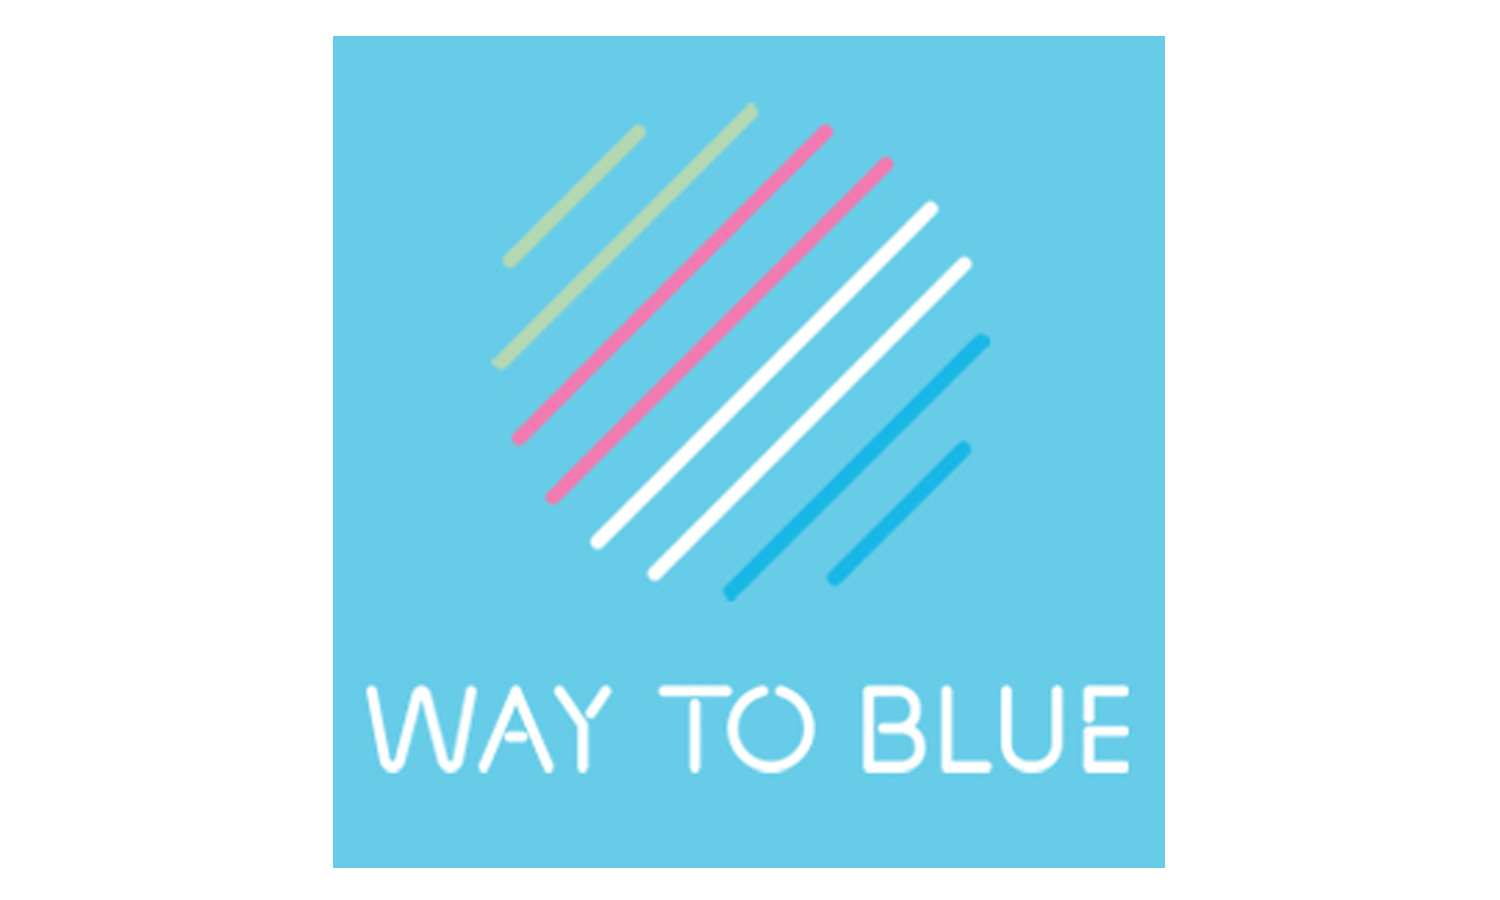 WAY TO BLUE